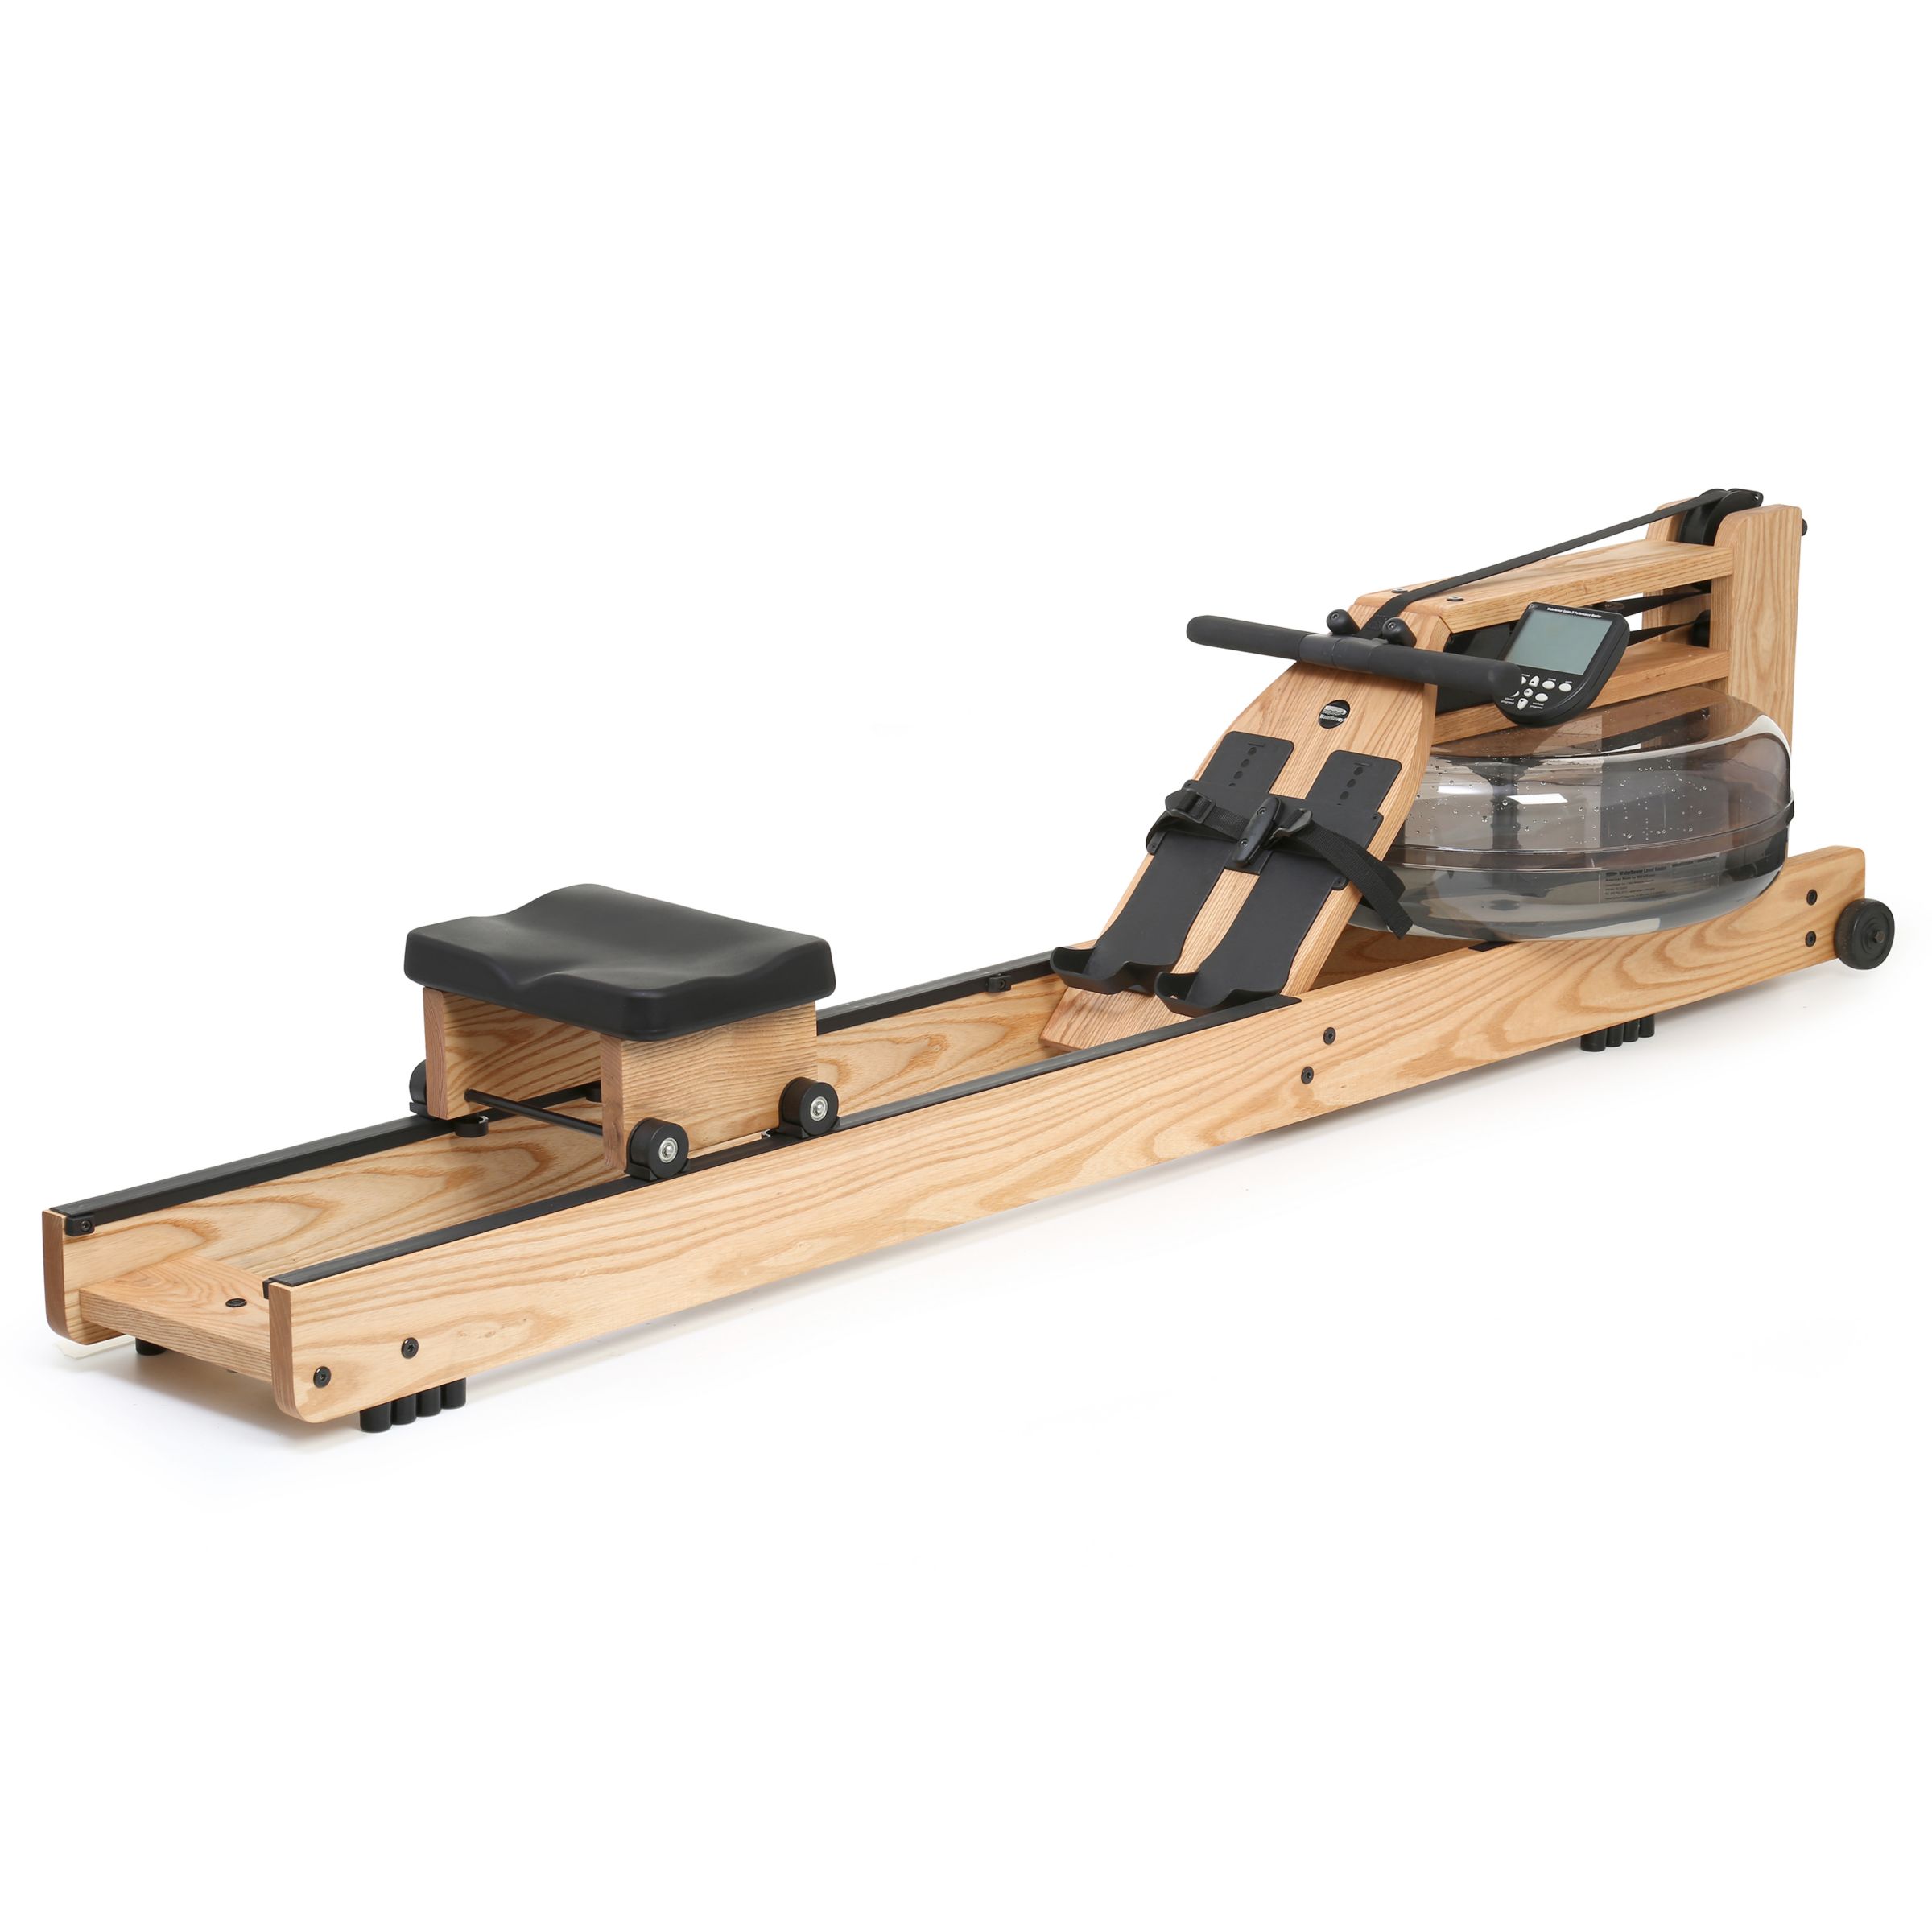 WaterRower Natural Rowing Machine with S4 Performance Monitor, Ash